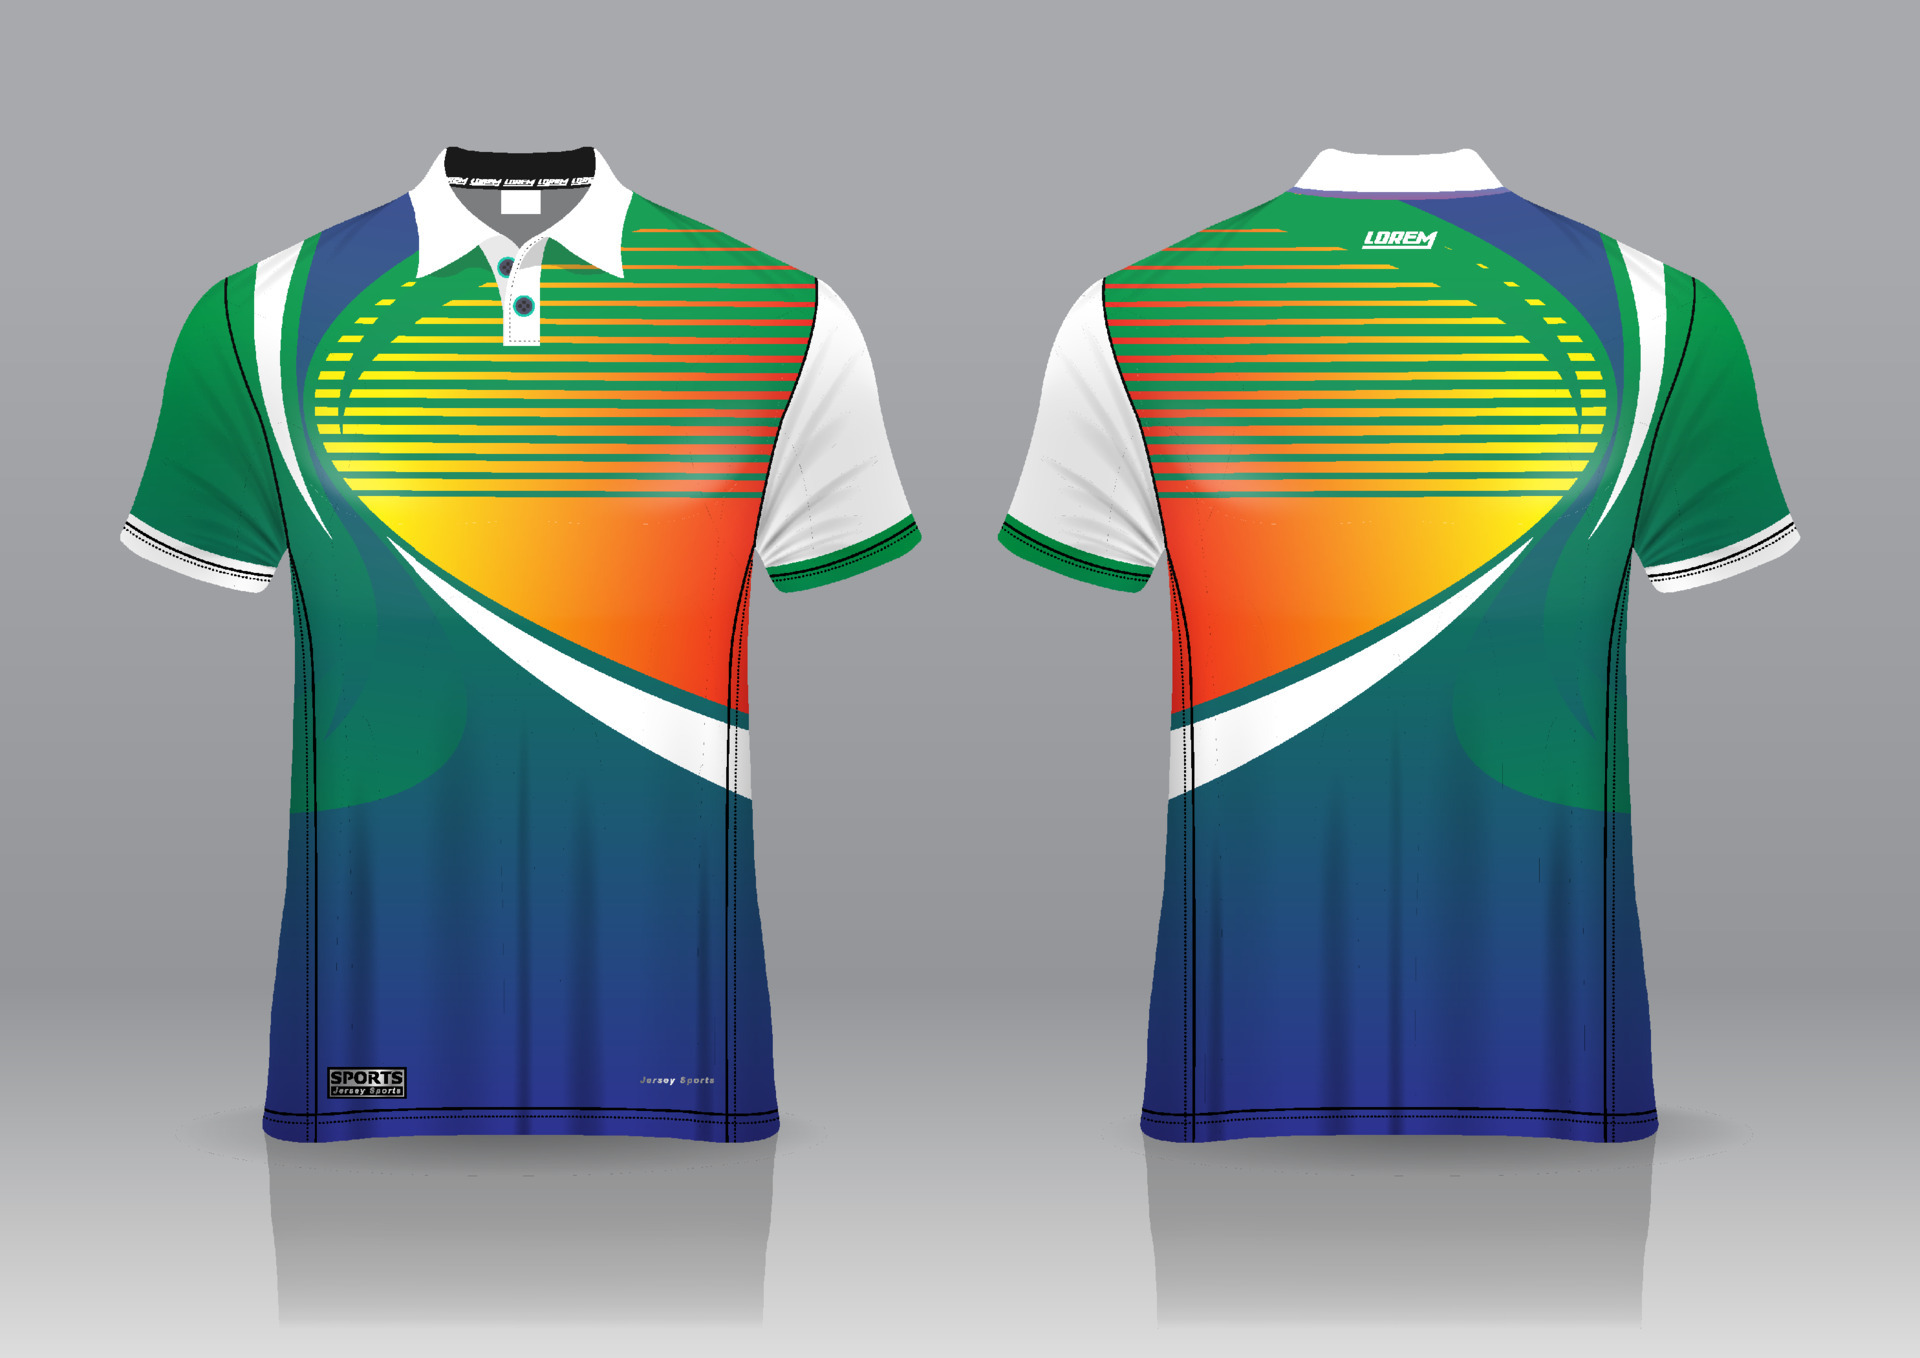 polo shirt uniform design, can be used for badminton, golf in front ...